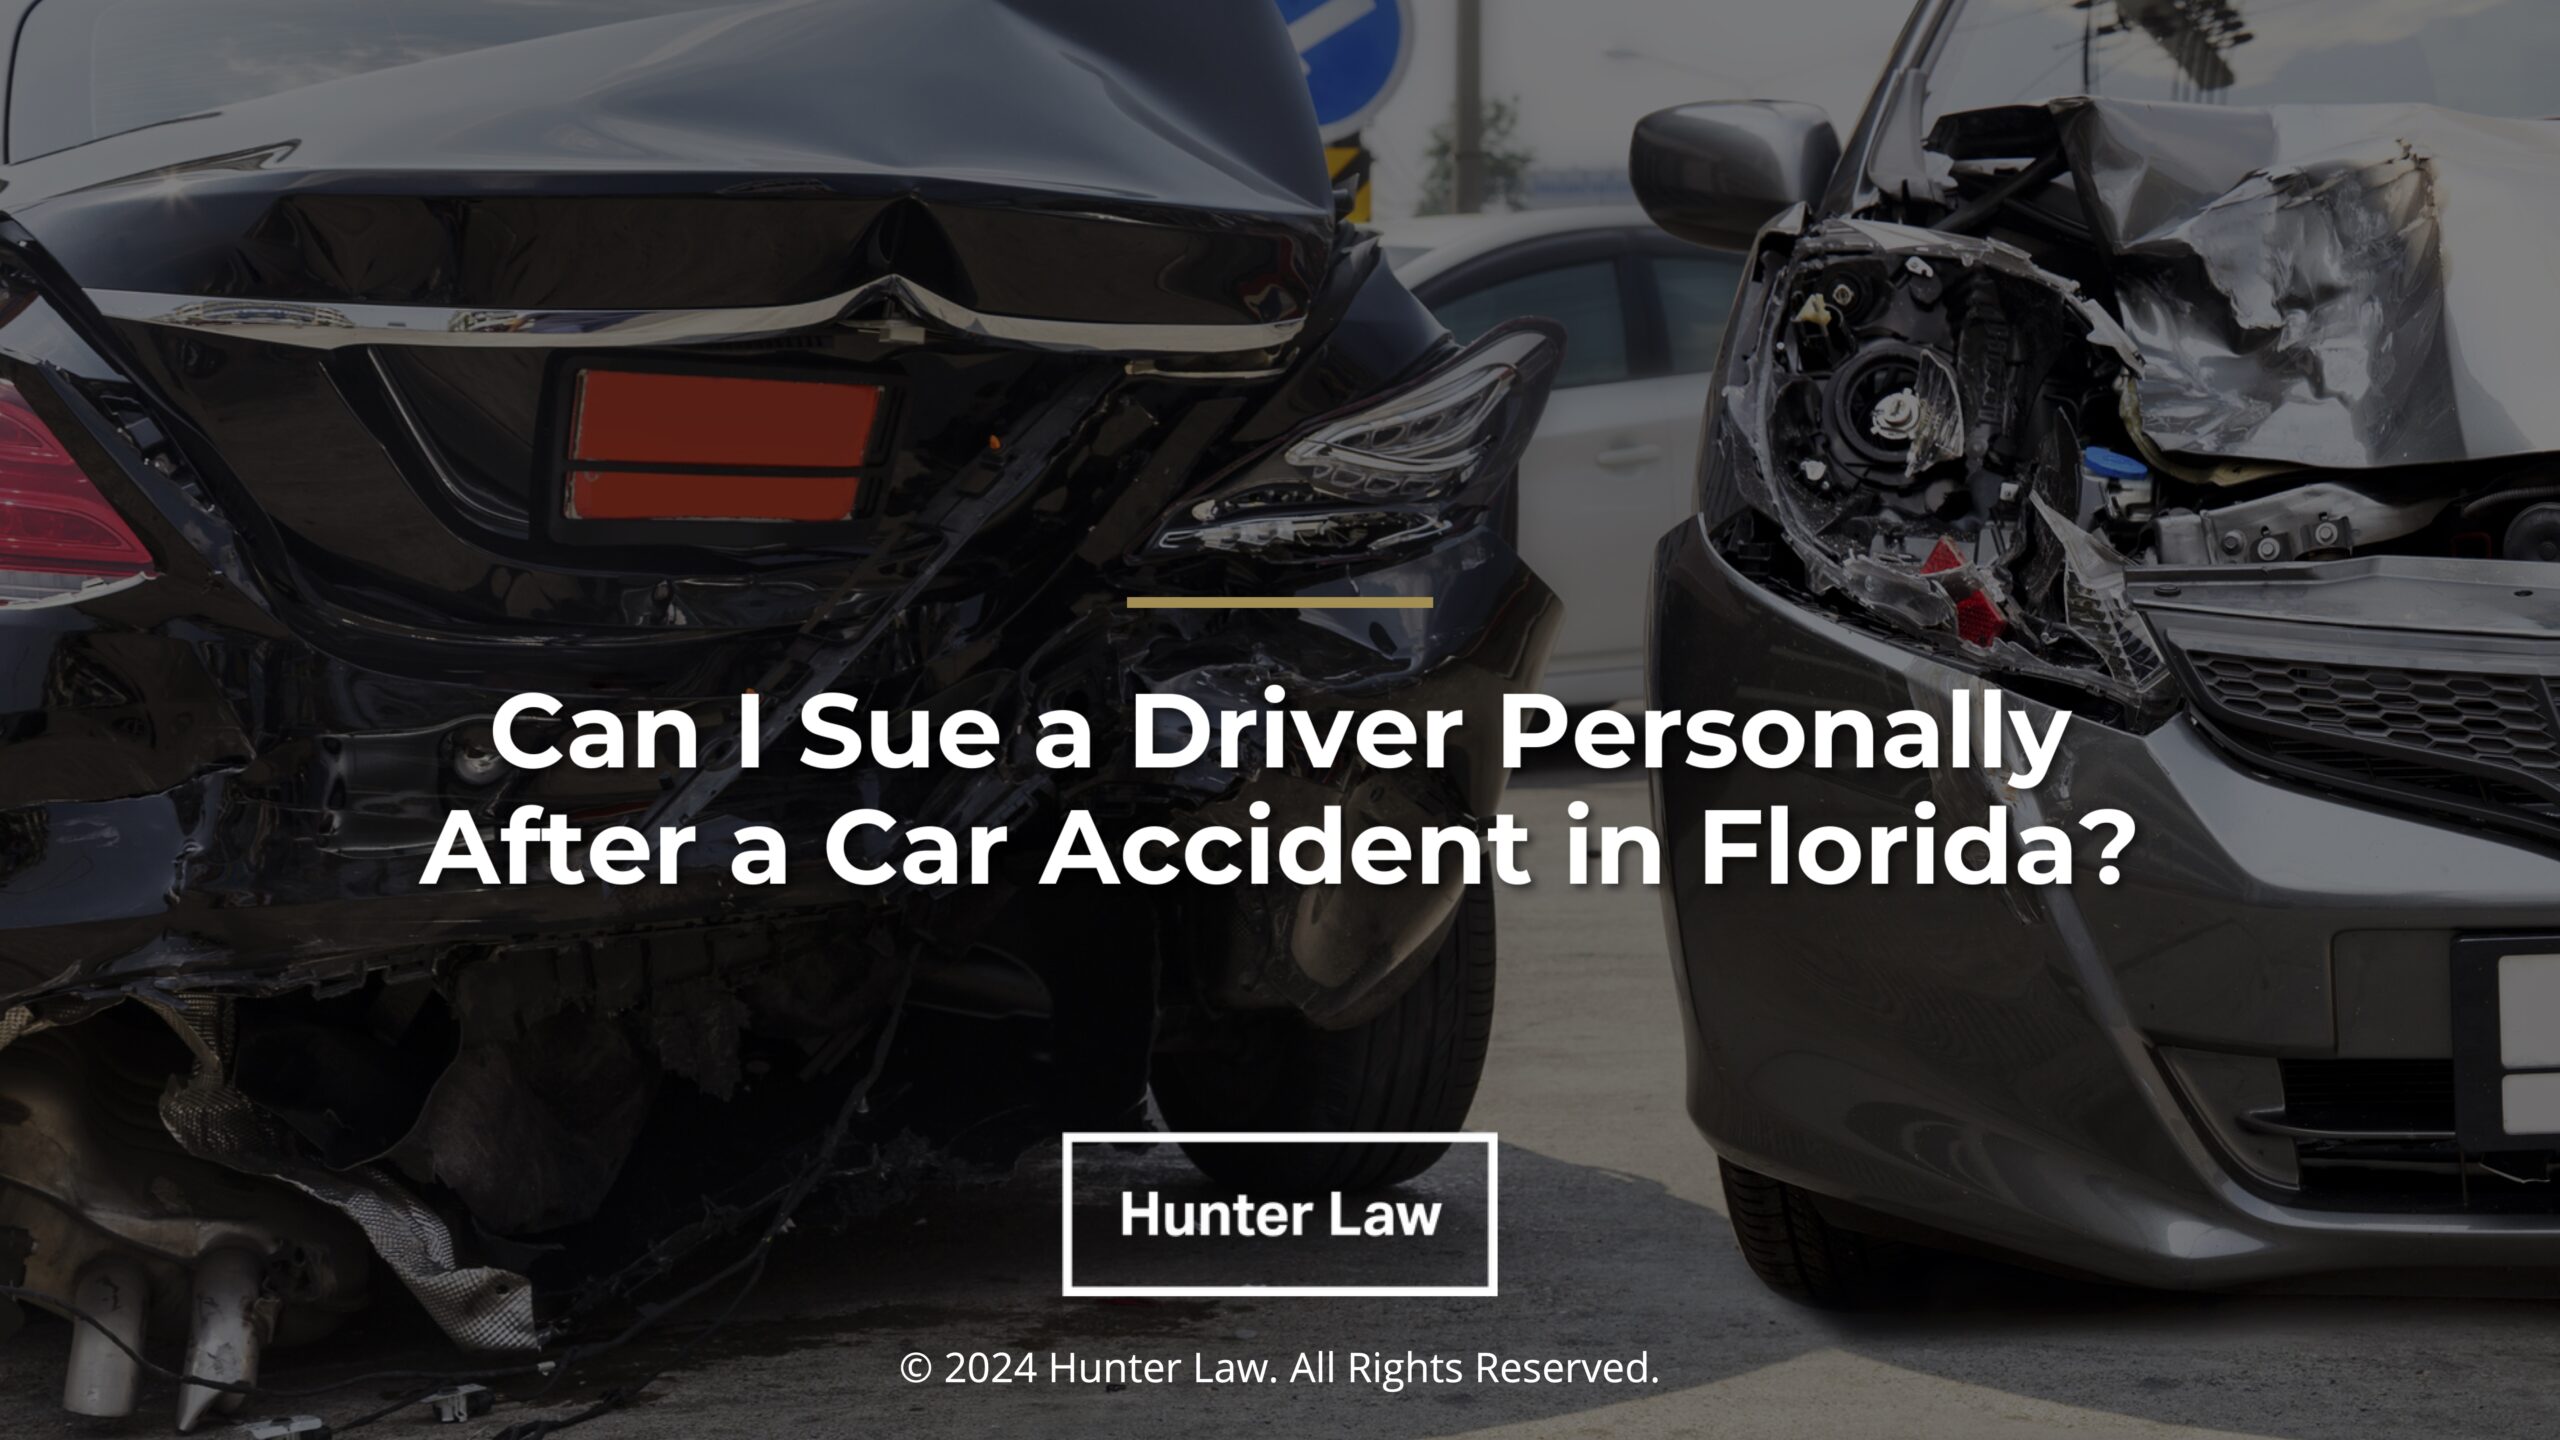 Featured: Car crash accident on street- Can I sue a driver personally after a car accident in Florida?